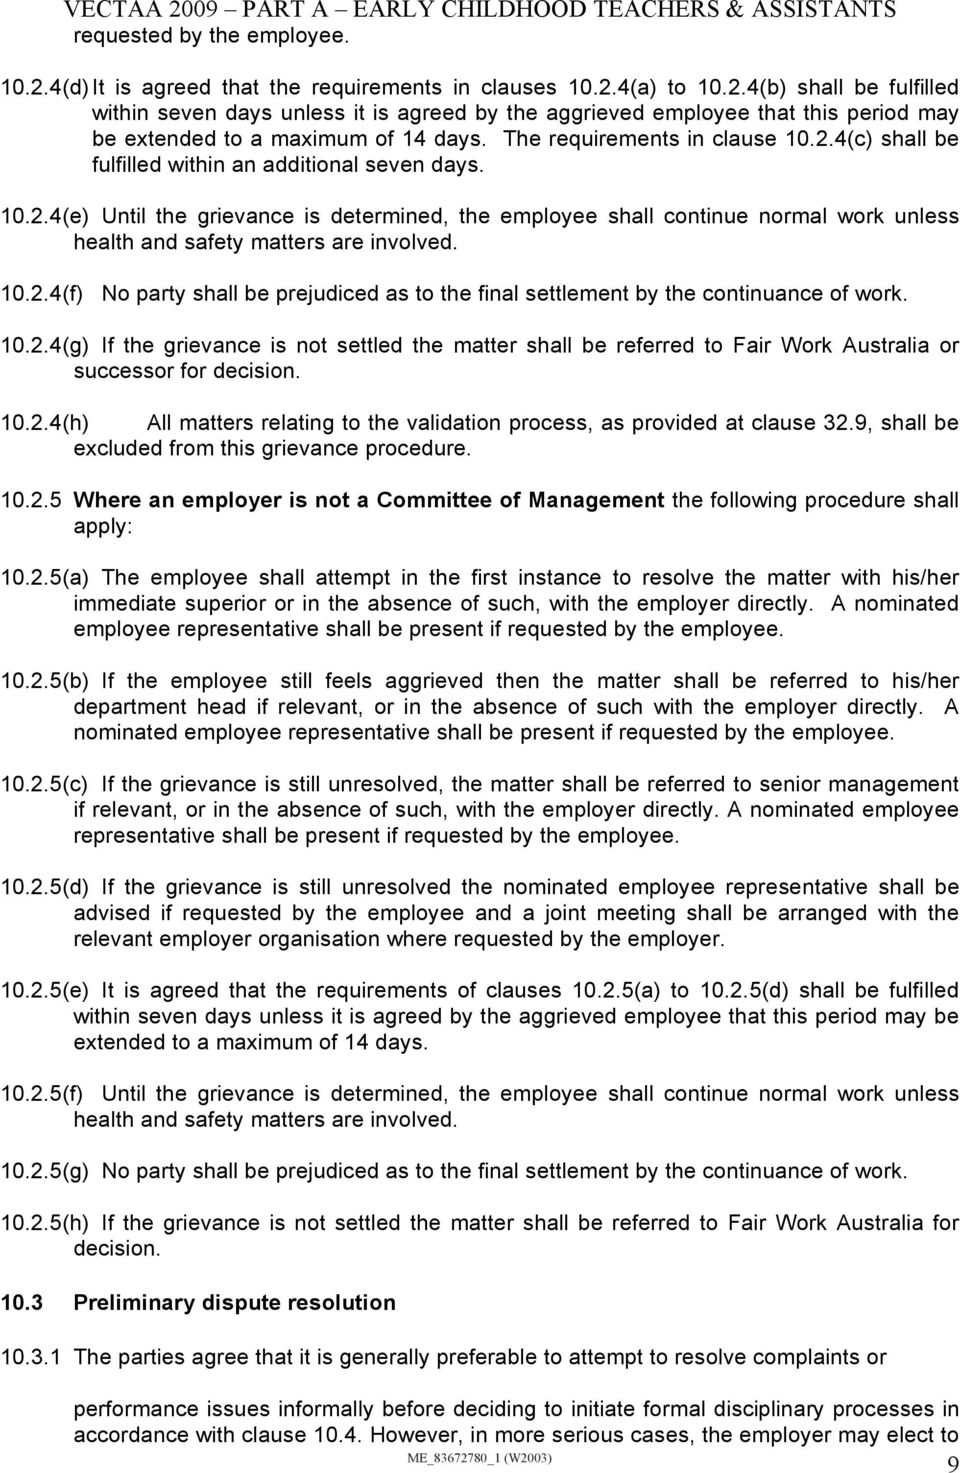 10.2.4(f) No party shall be prejudiced as to the final settlement by the continuance of work. 10.2.4(g) If the grievance is not settled the matter shall be referred to Fair Work Australia or successor for decision.